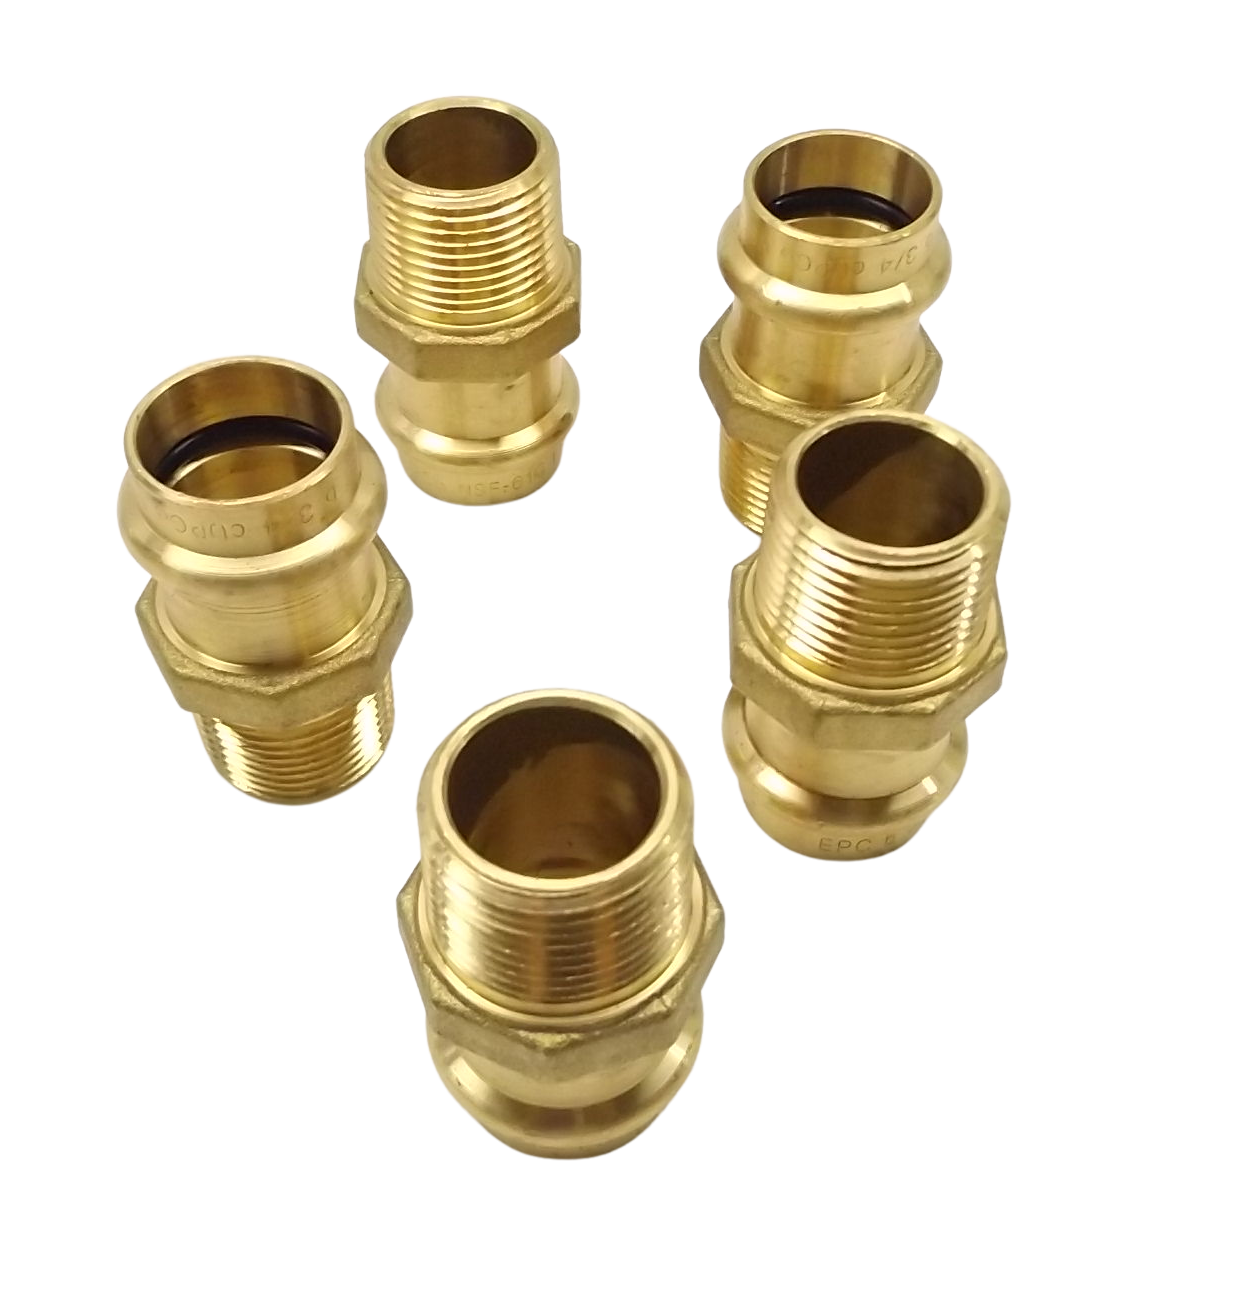 LOT OF 5 APOLLOXPRESS 10075808 3/4" MALE ADAPTER